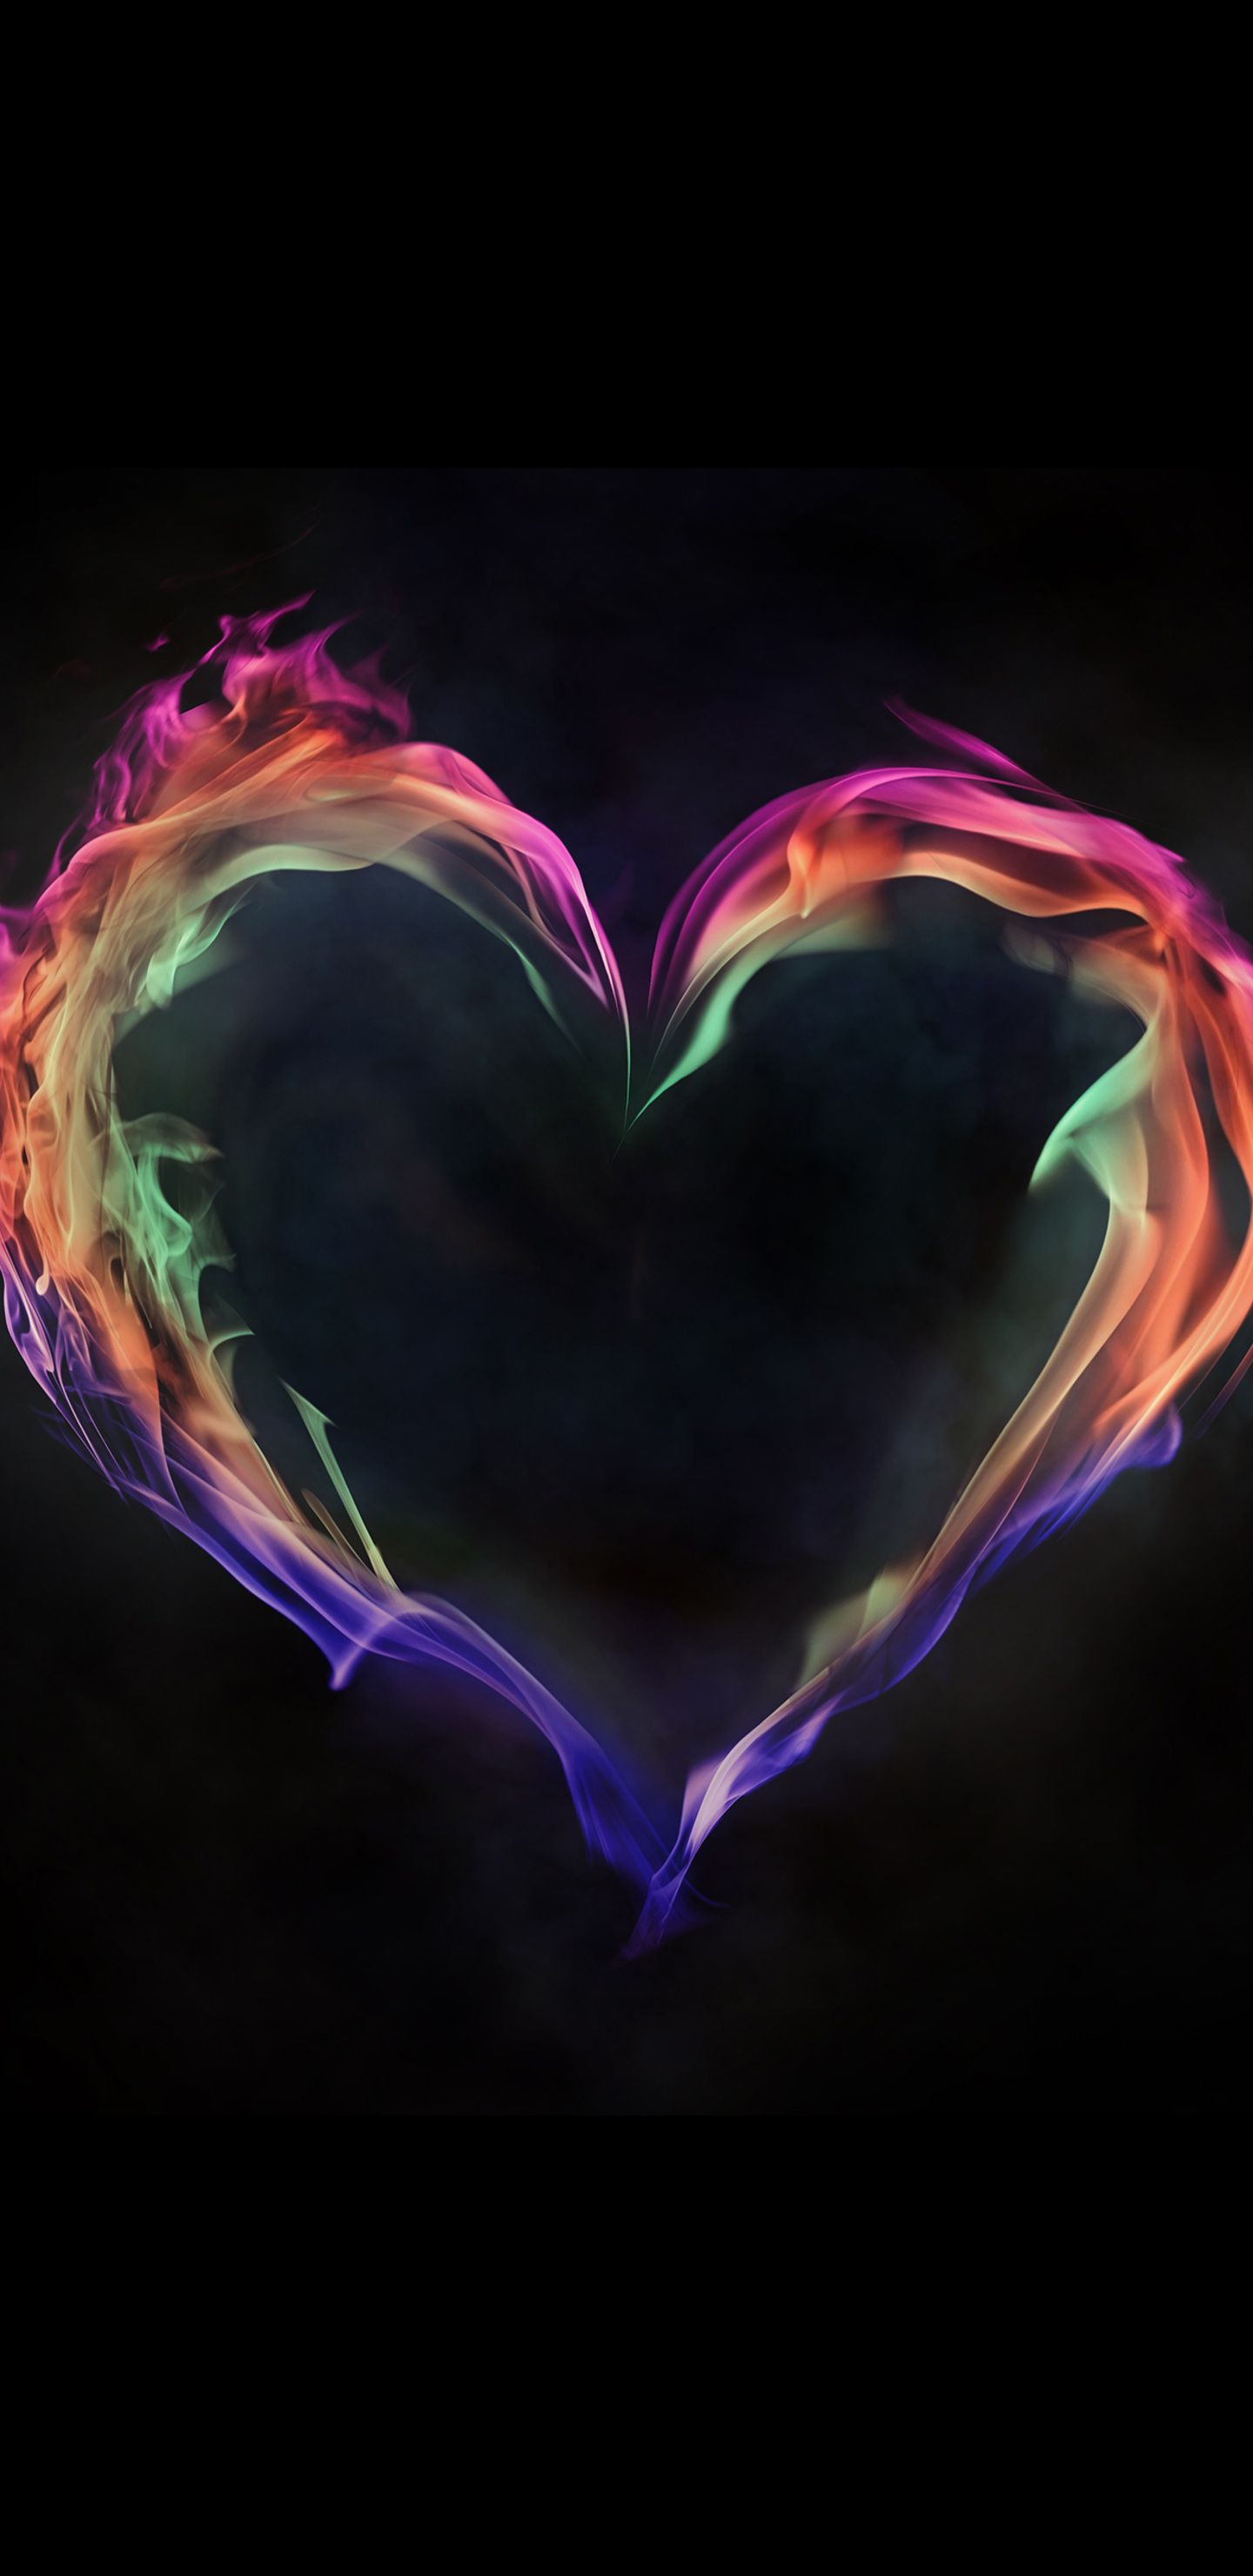 Flame Artistic Heart Love 5k Samsung Galaxy Note S S SQHD HD 4k Wallpaper, Image, Background, Photo and Picture